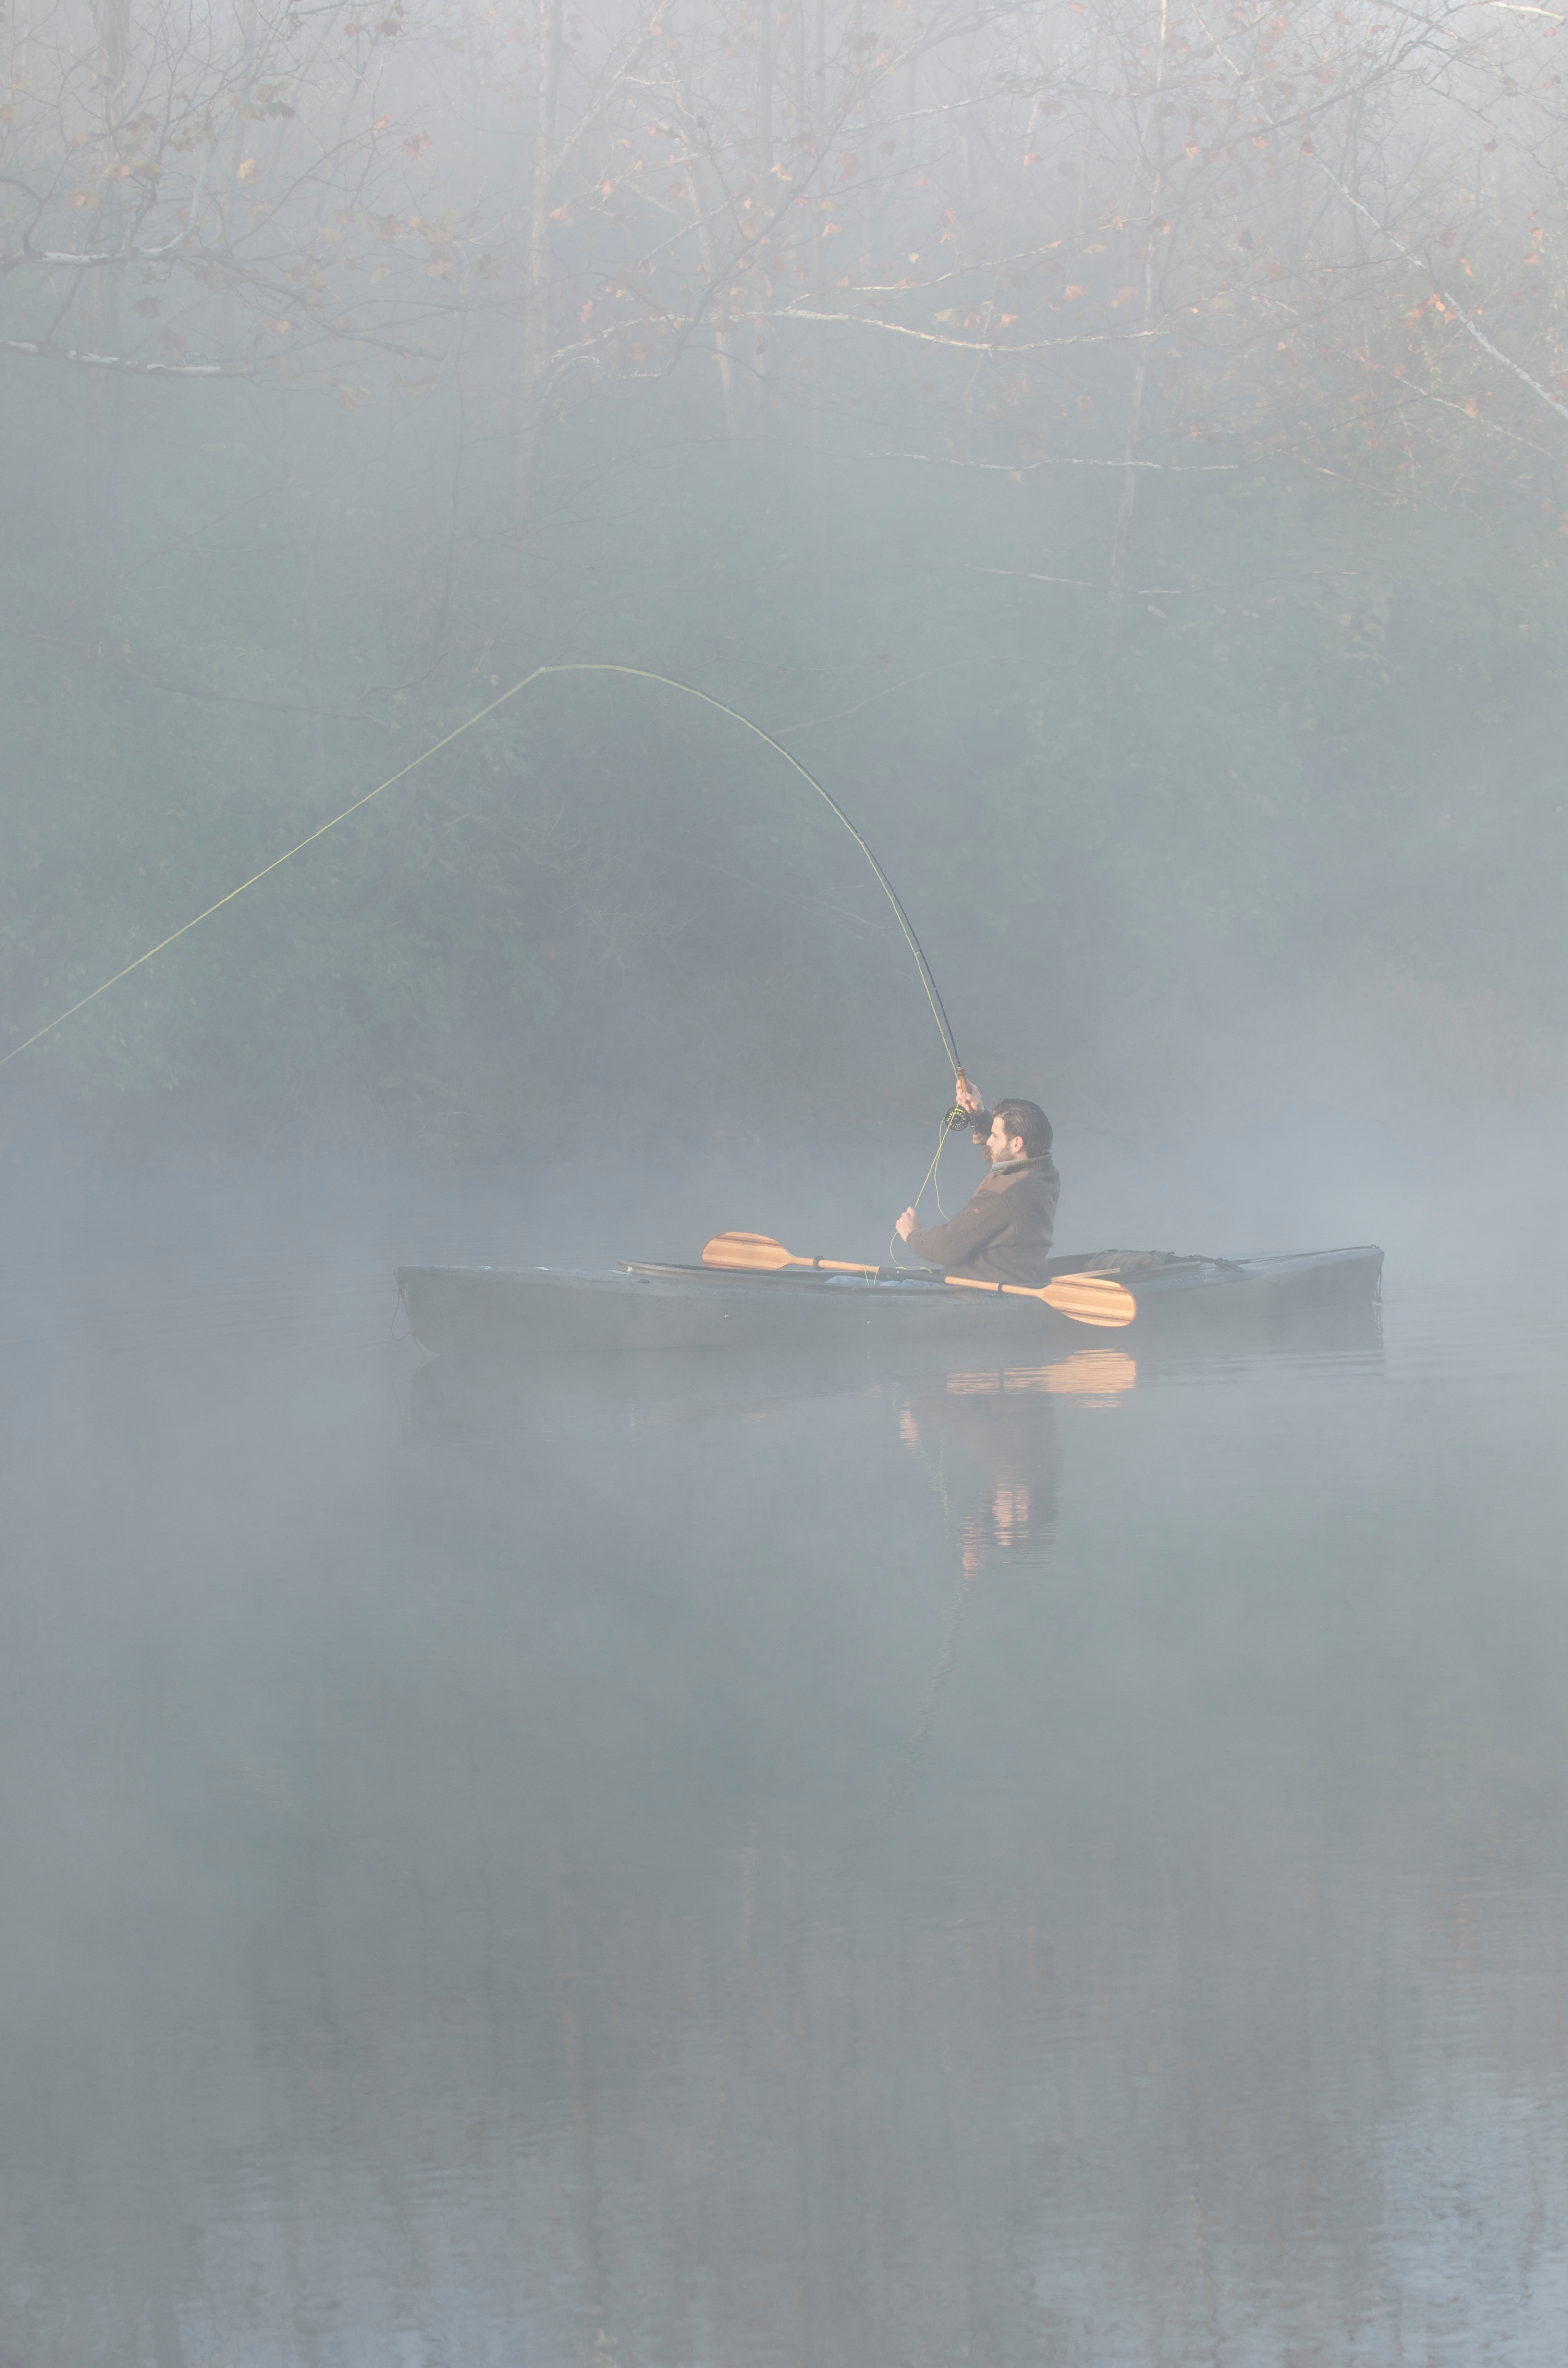 A kayak angler ties into a big fish on a Pyramid State Recreation Area strip pit.